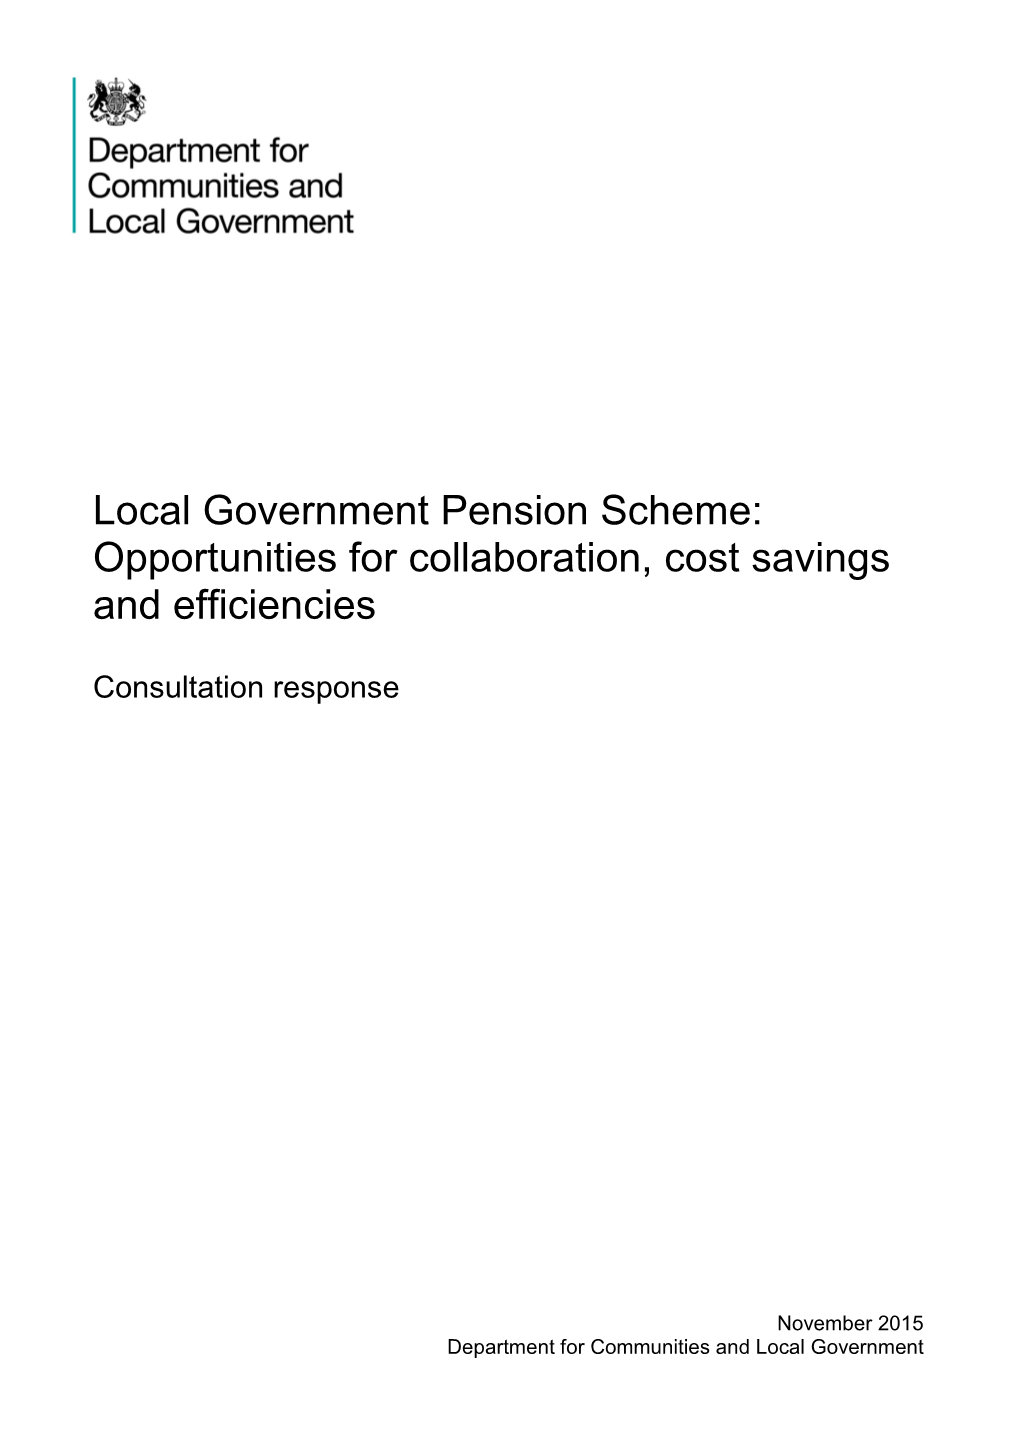 Local Government Pension Scheme: Opportunities for Collaboration, Cost Savings and Efficiencies